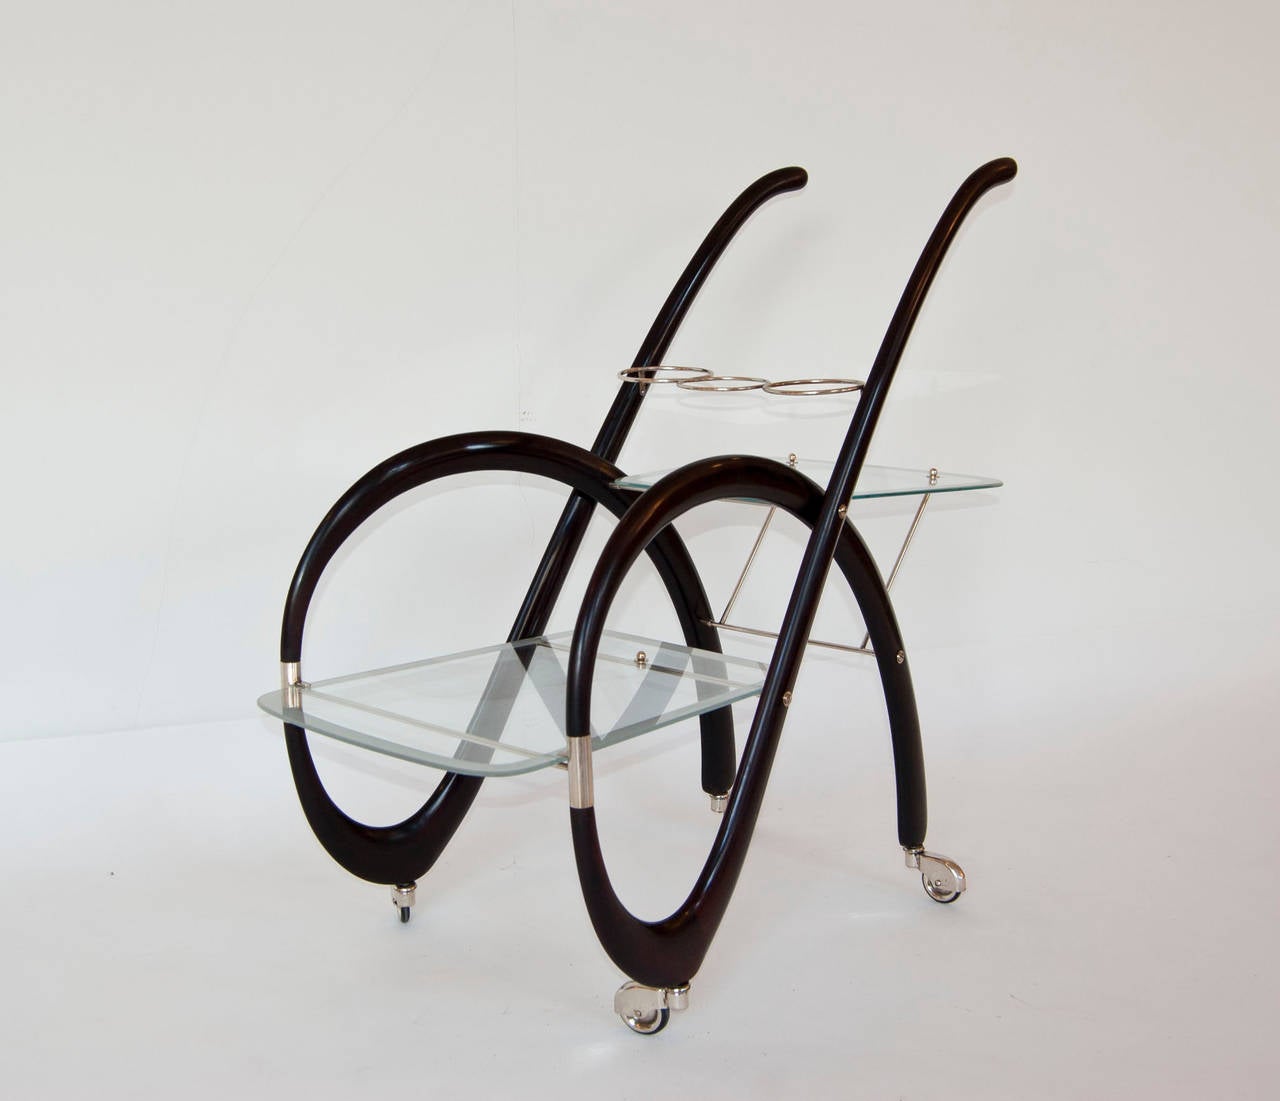 Very particular shaped serving cart with two glass levels and three bottle holders in the upper part. The dark patinated wood goes very well with the silver plated brass and the fine glass.